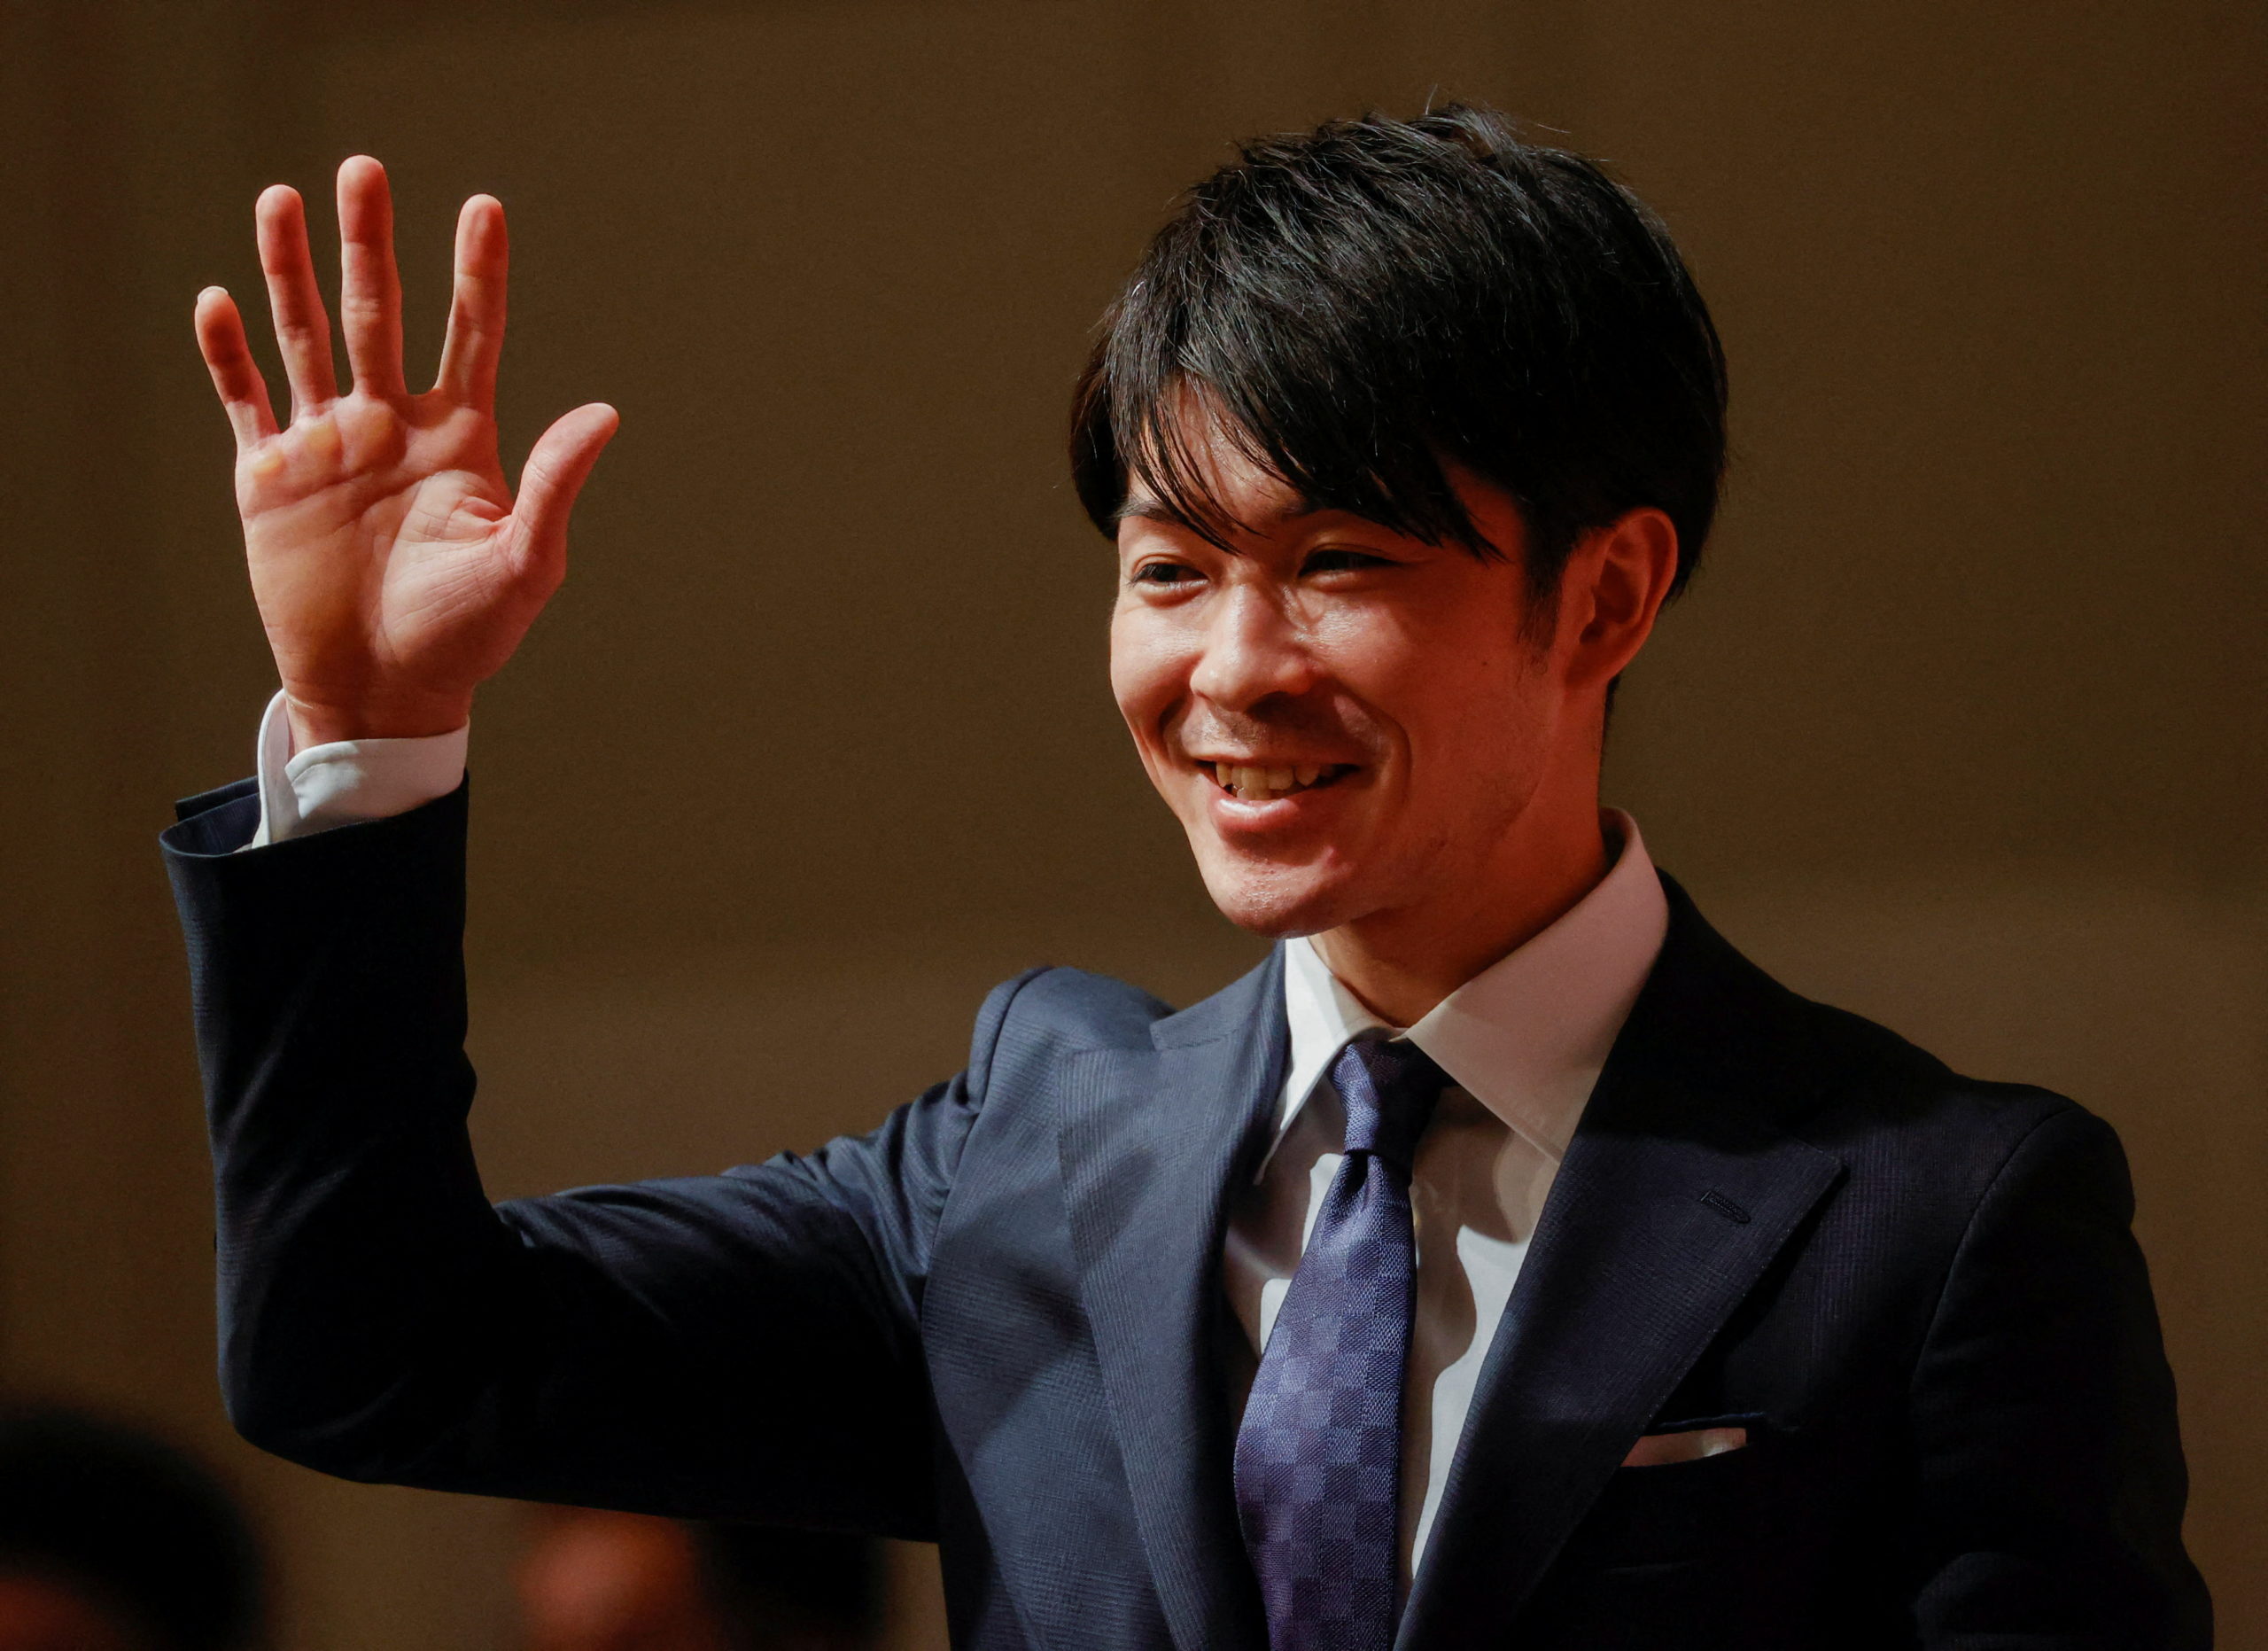 Japan's two-time Olympic all-around gymnastics champion Kohei Uchimura waves as he leaves a news conference on his retirement in Tokyo, Japan January 14, 2022